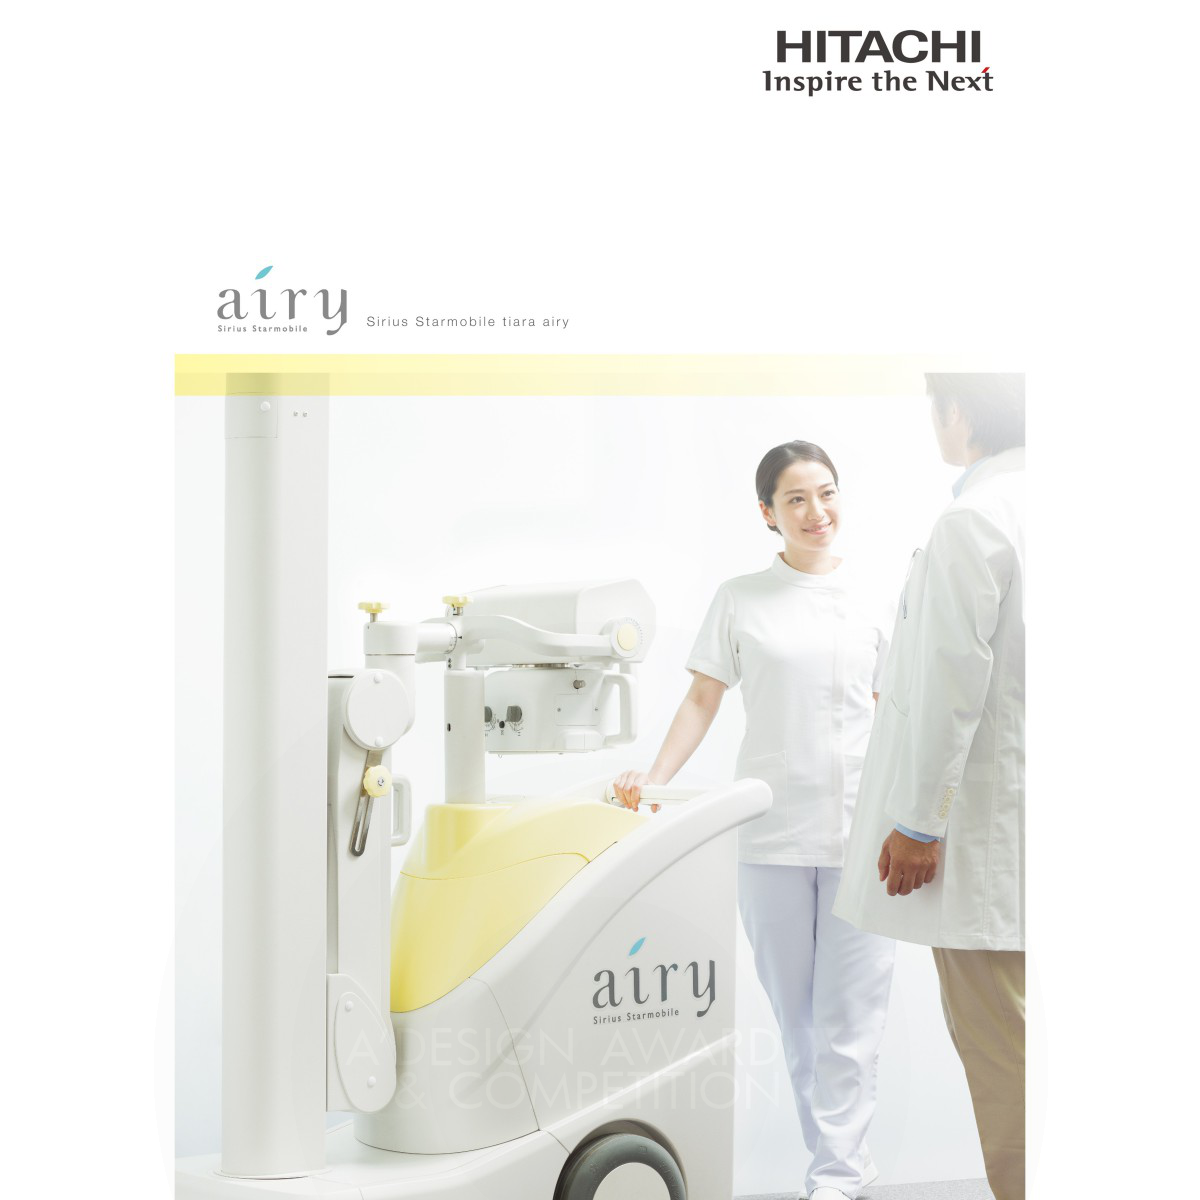 HITACHI airy Pamphlet by E-graphics communications